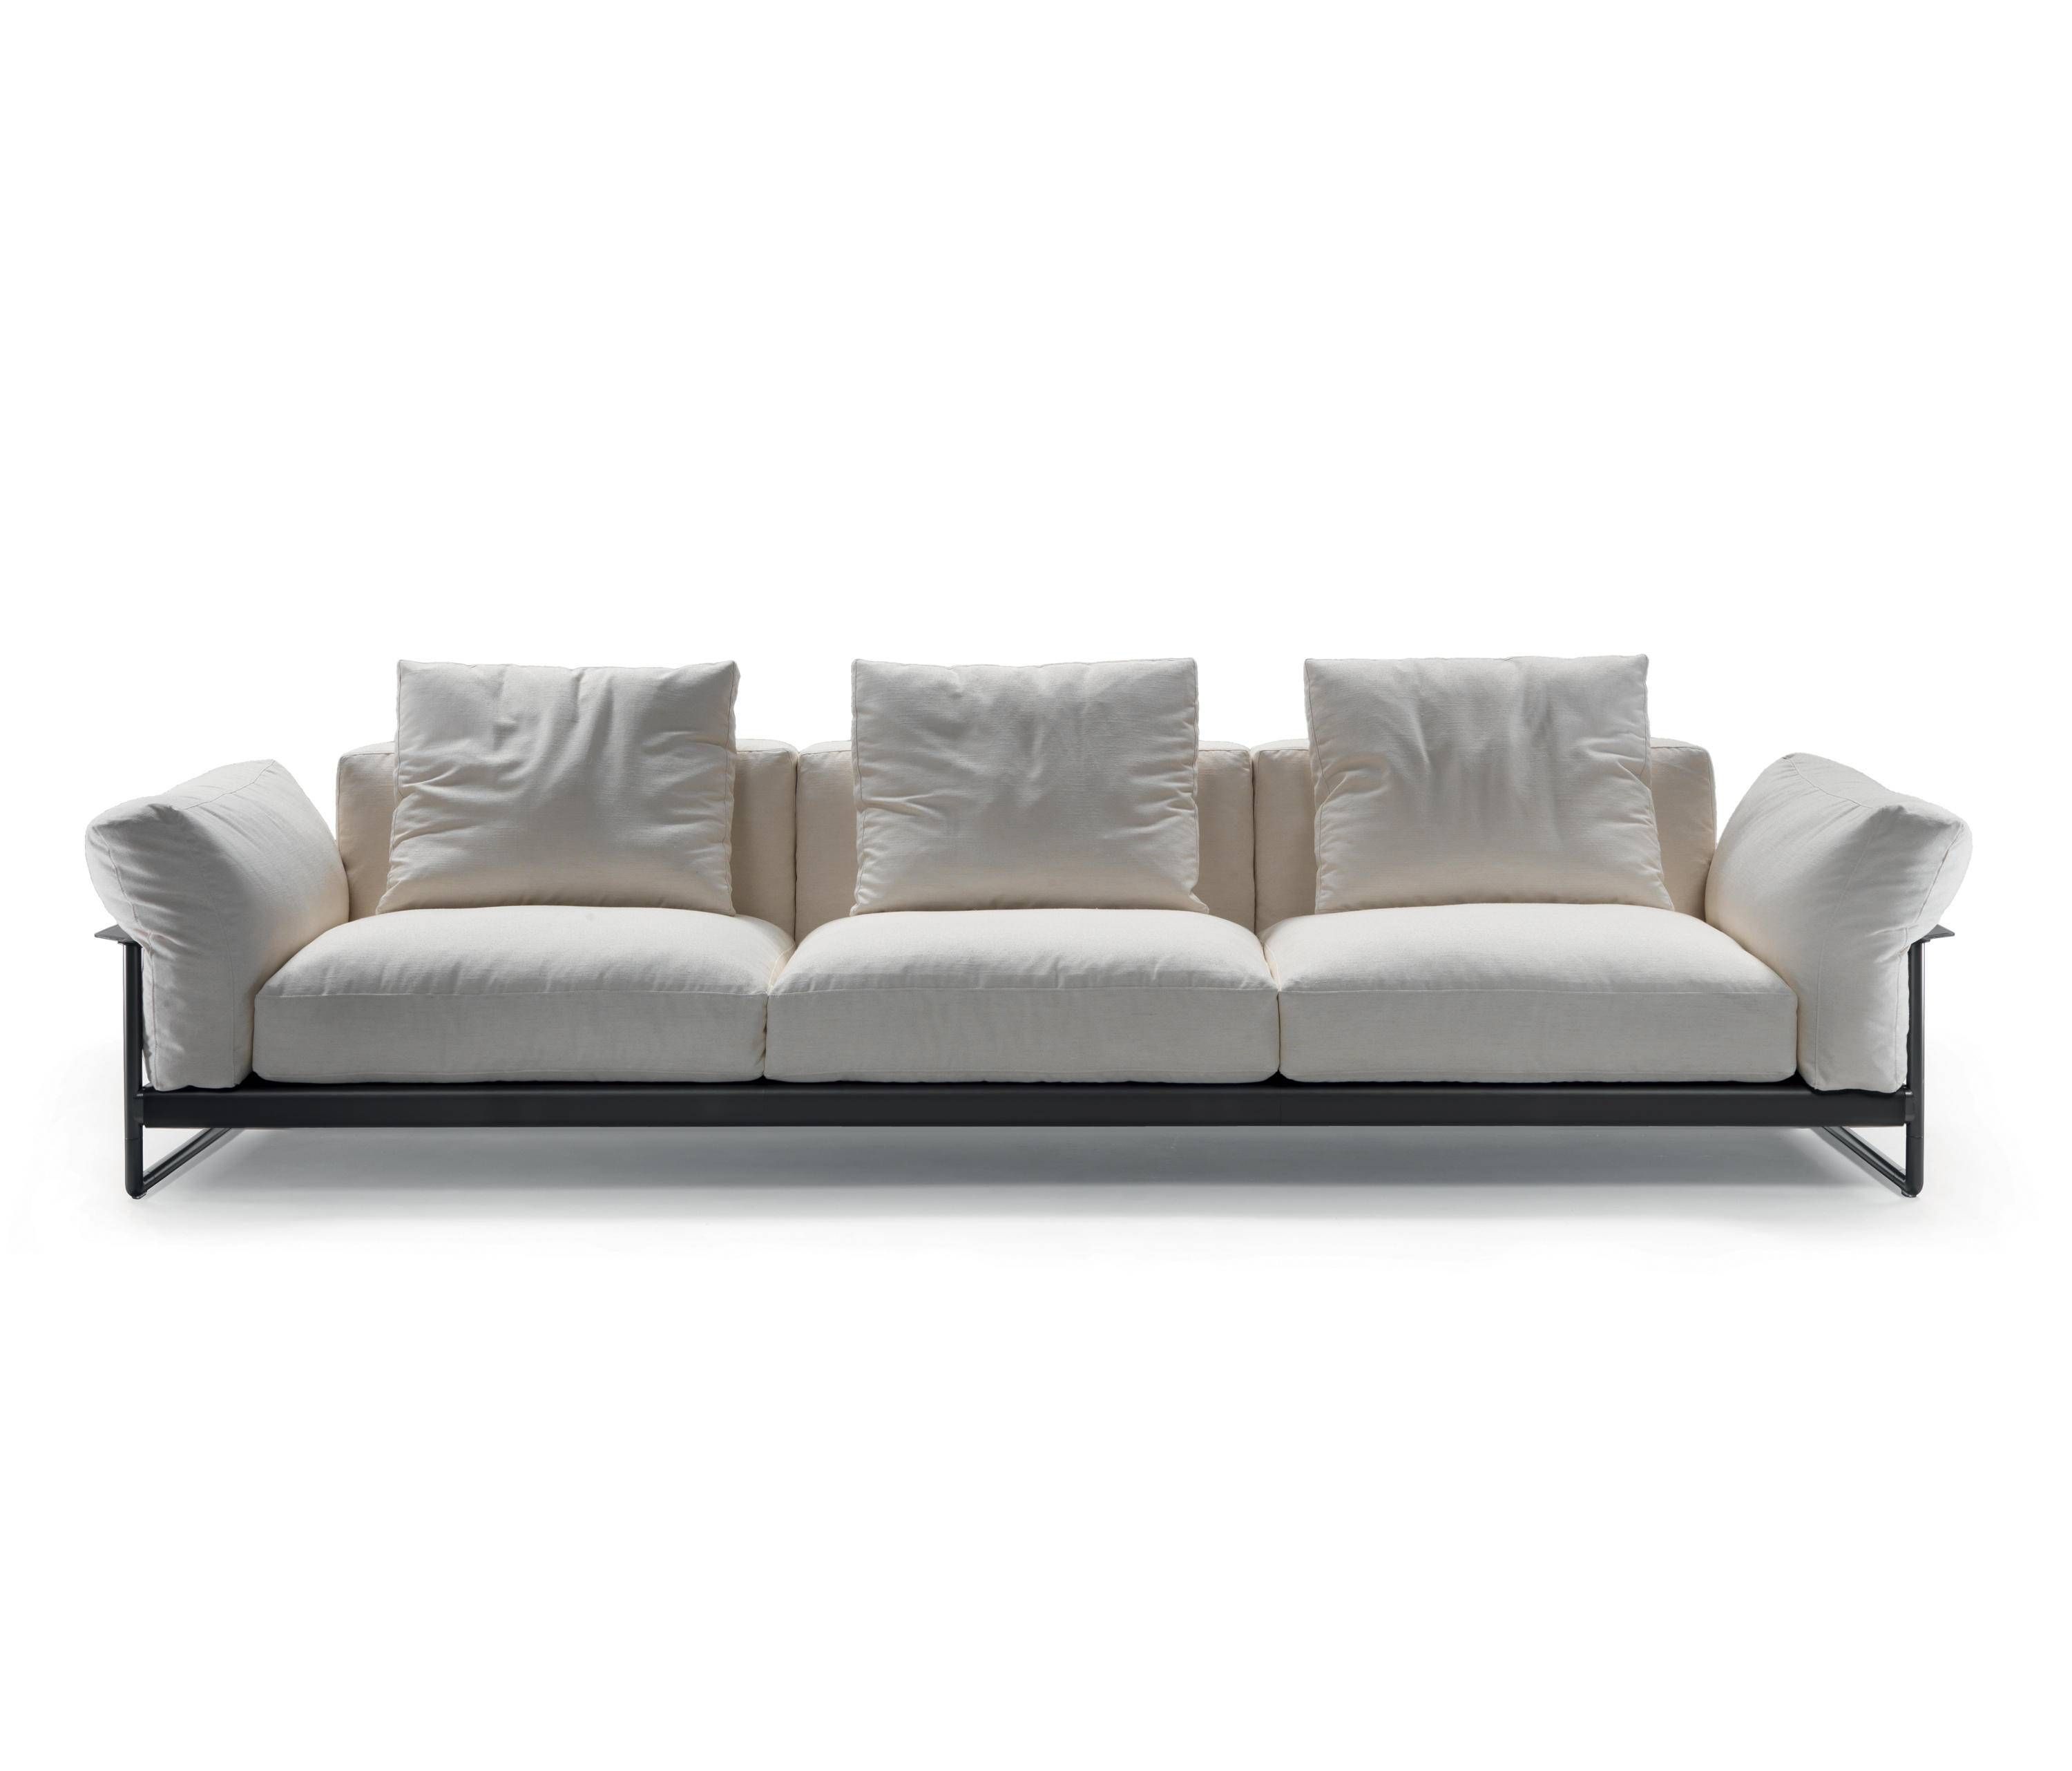 Sofas – Research And Select Flexform Products Online | Architonic In Flexform Sofas (View 1 of 25)